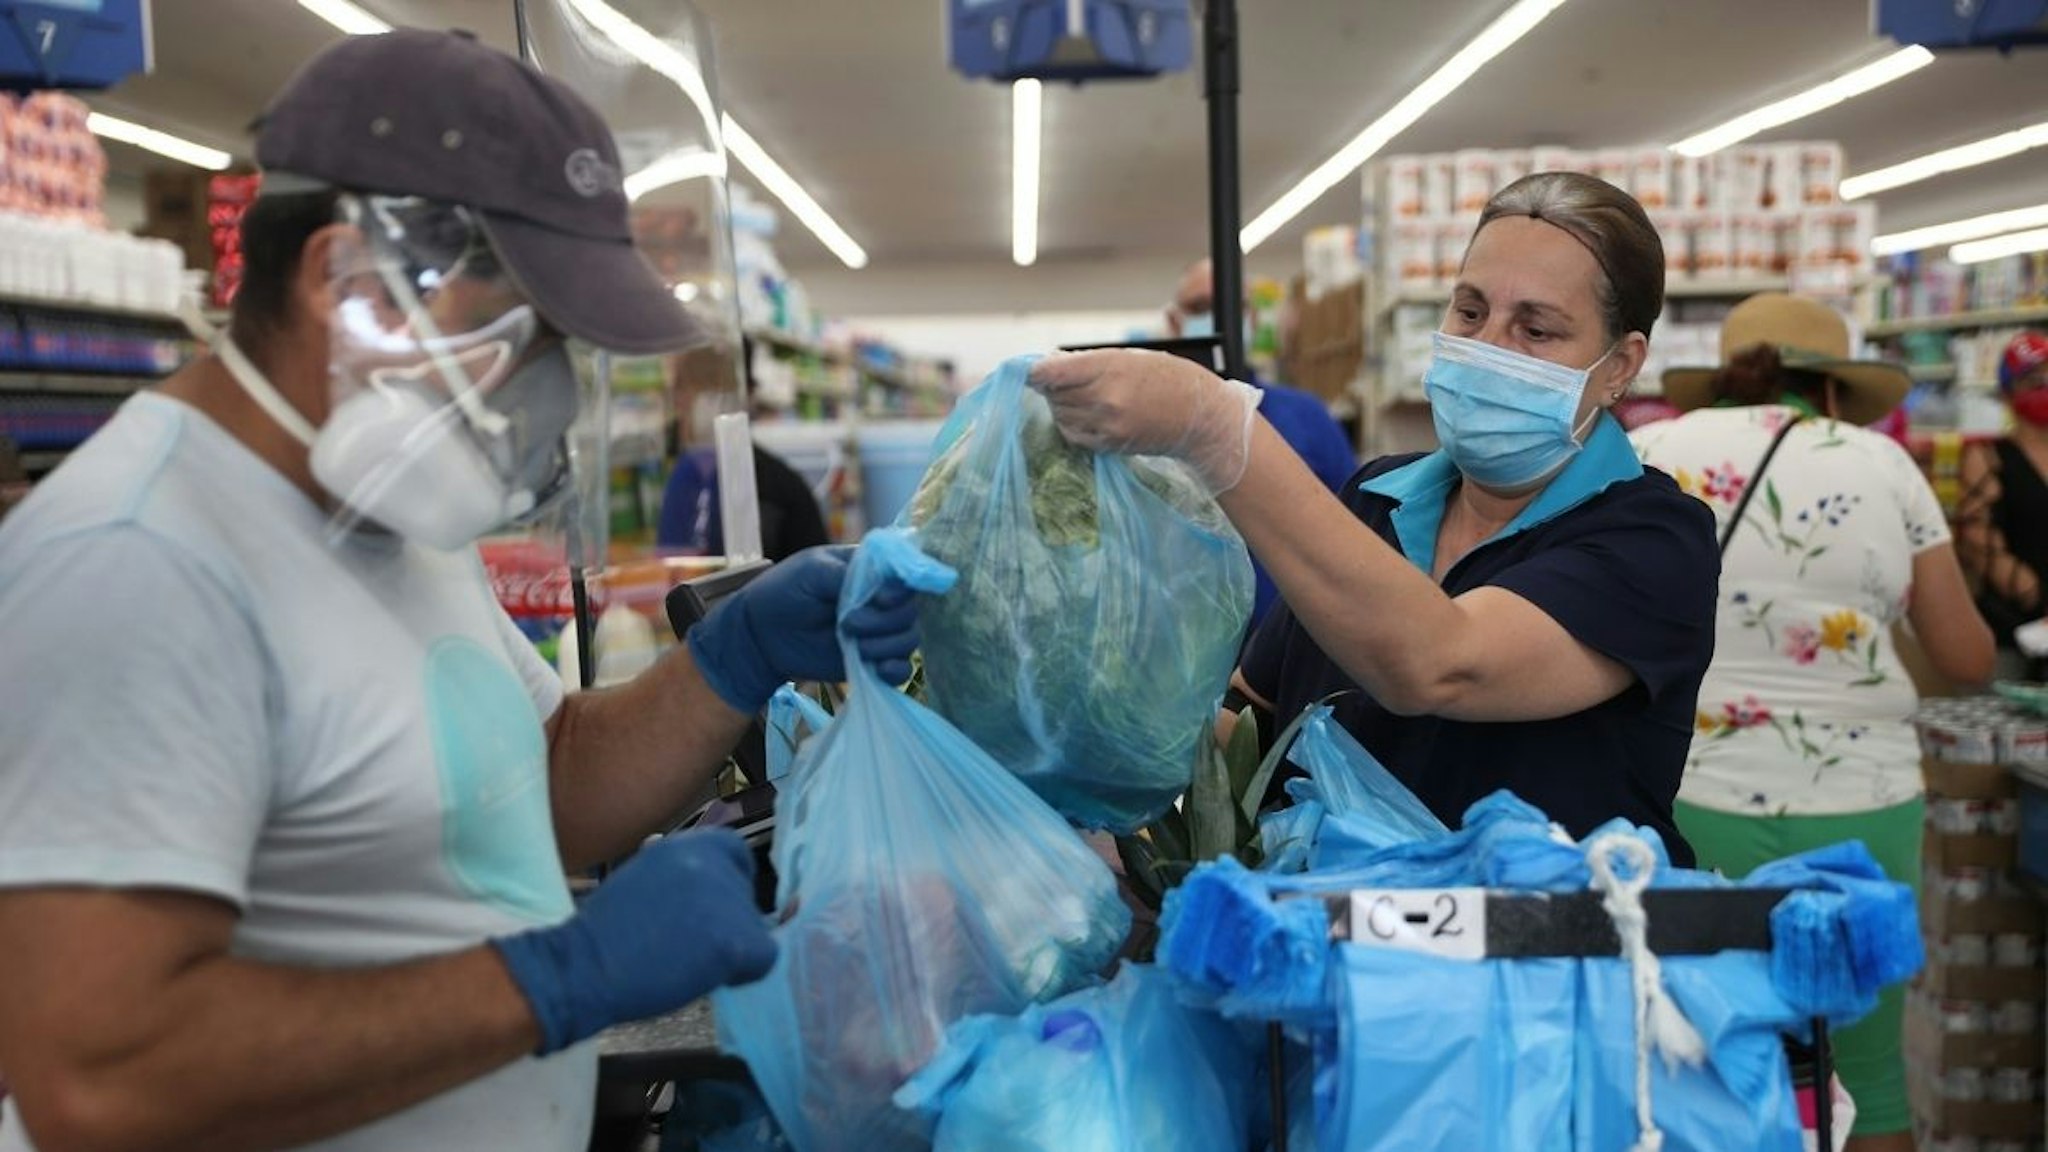 Lay Guzman stands behind a partial protective plastic screen and wears a mask and gloves as she works as a cashier at the Presidente Supermarket on April 13, 2020 in Miami, Florida.